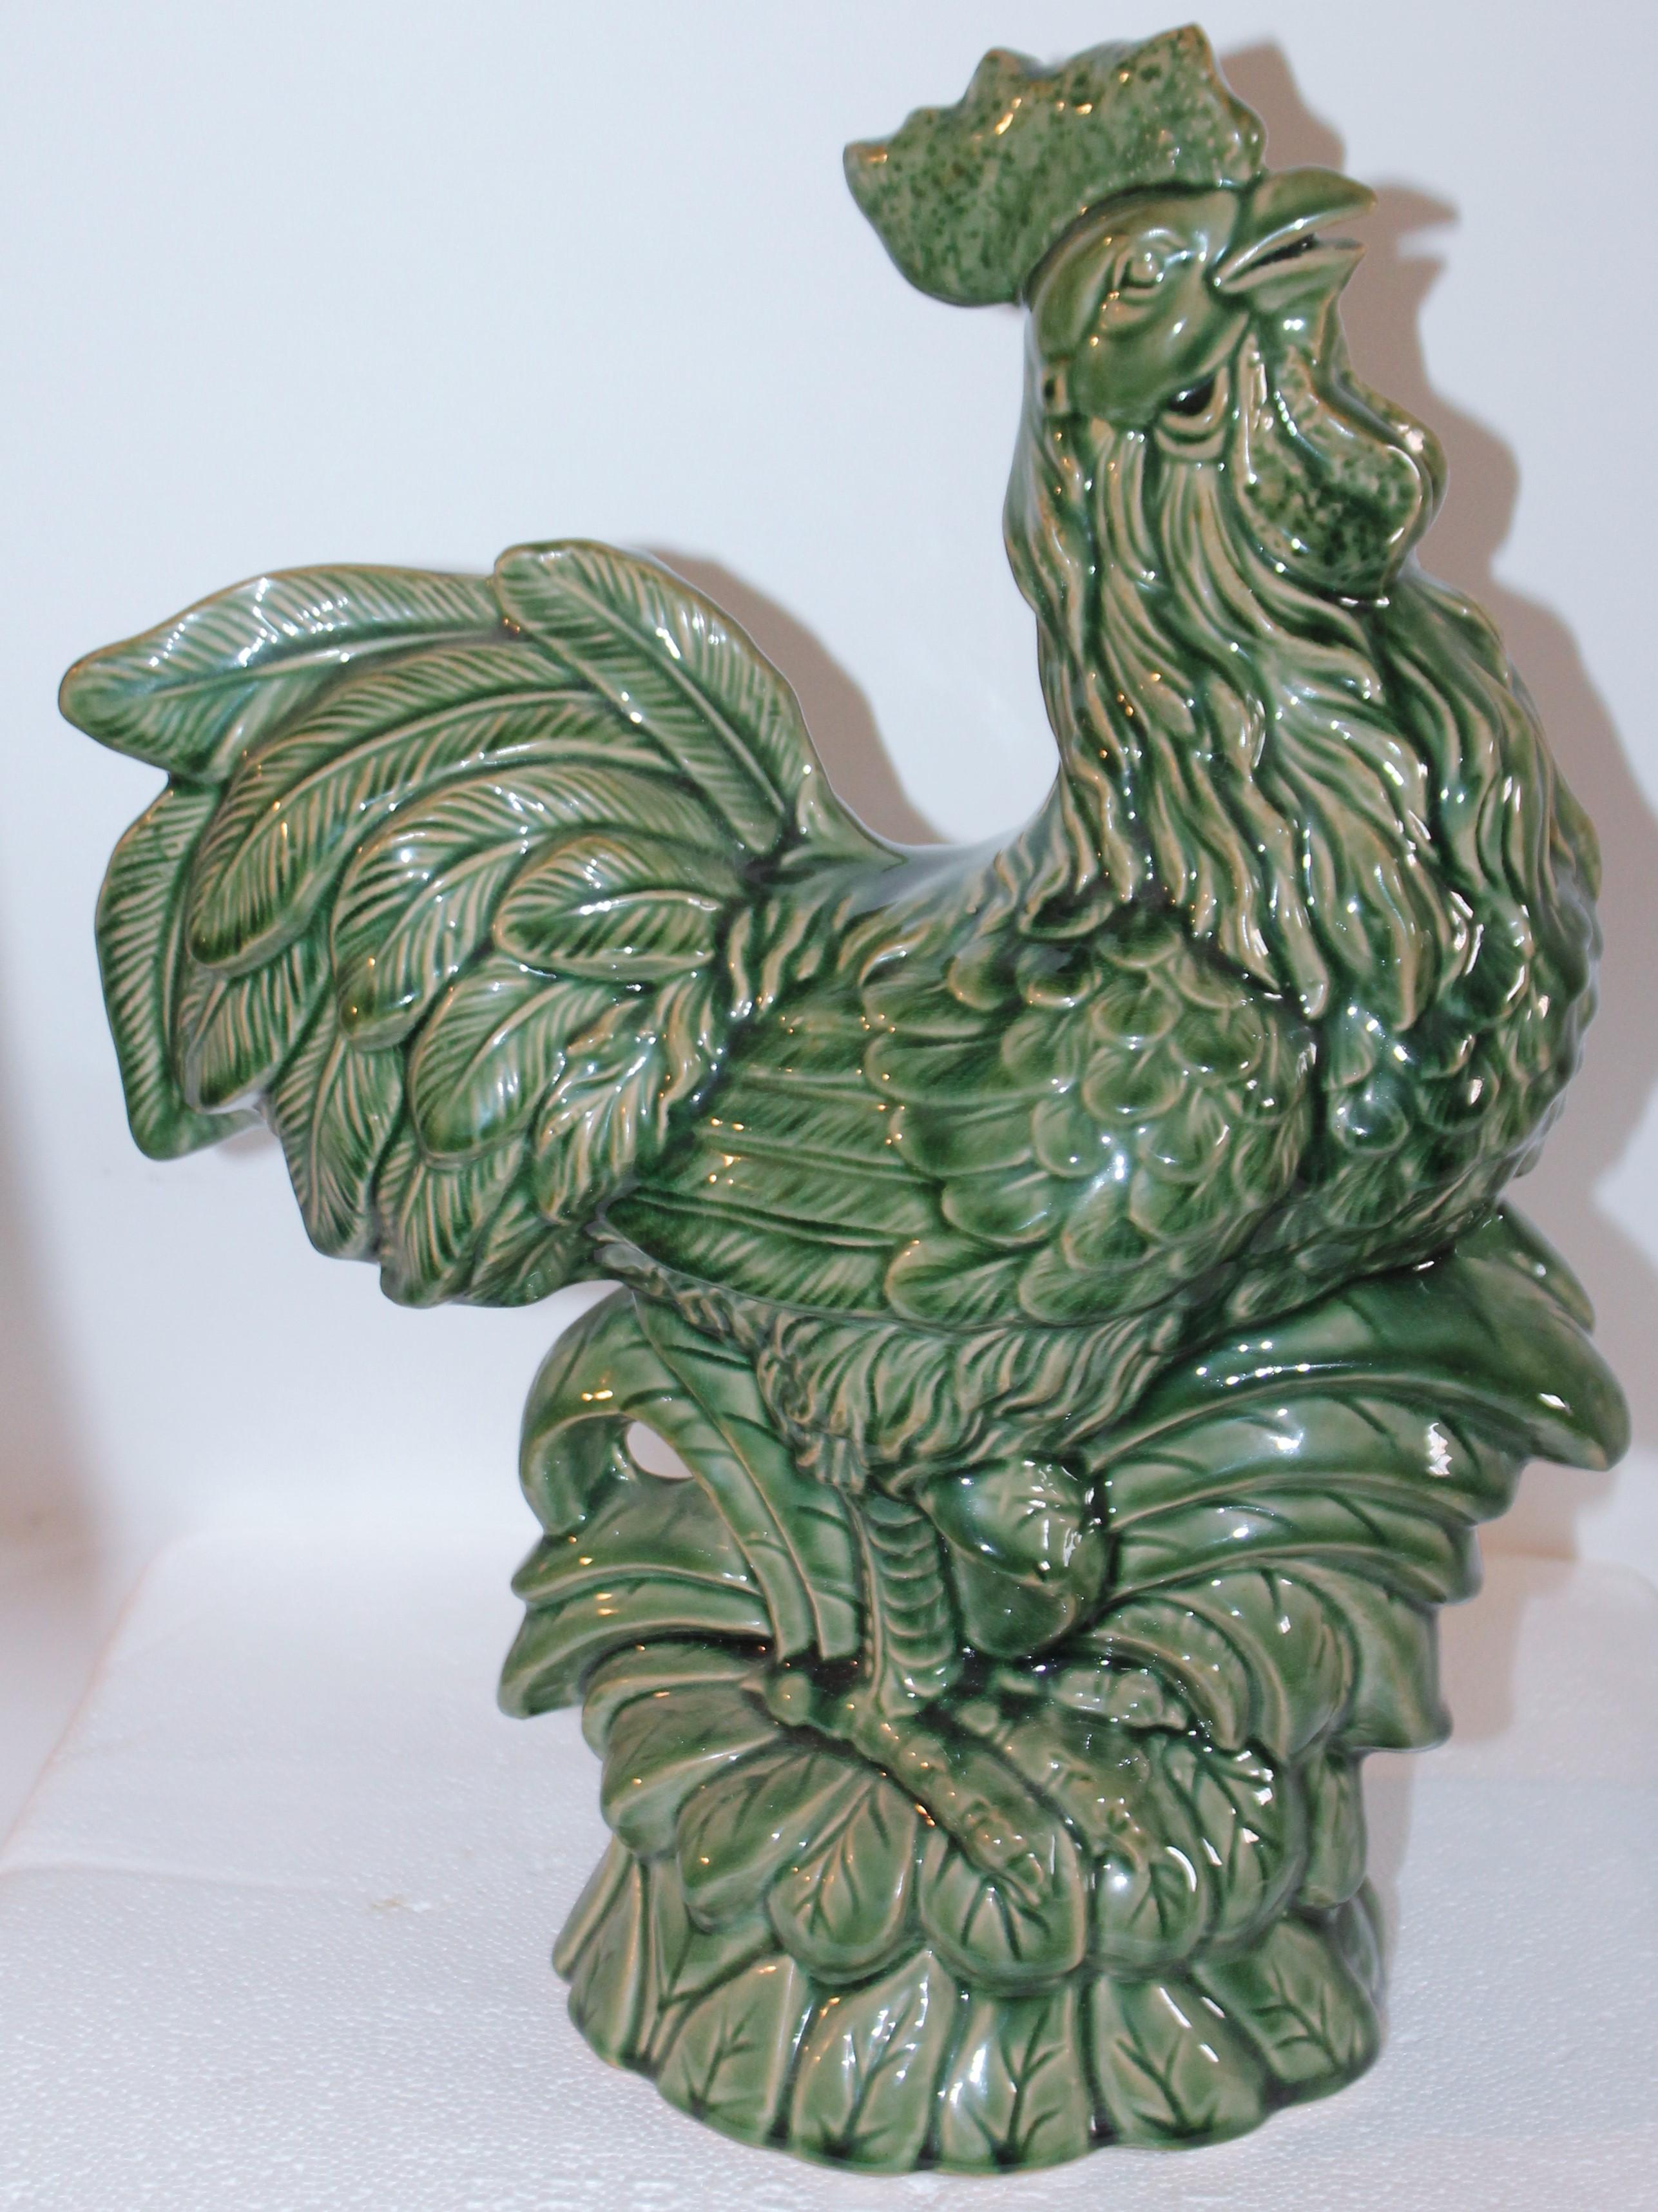 Rooster with majolica glaze pottery in pristine condition.